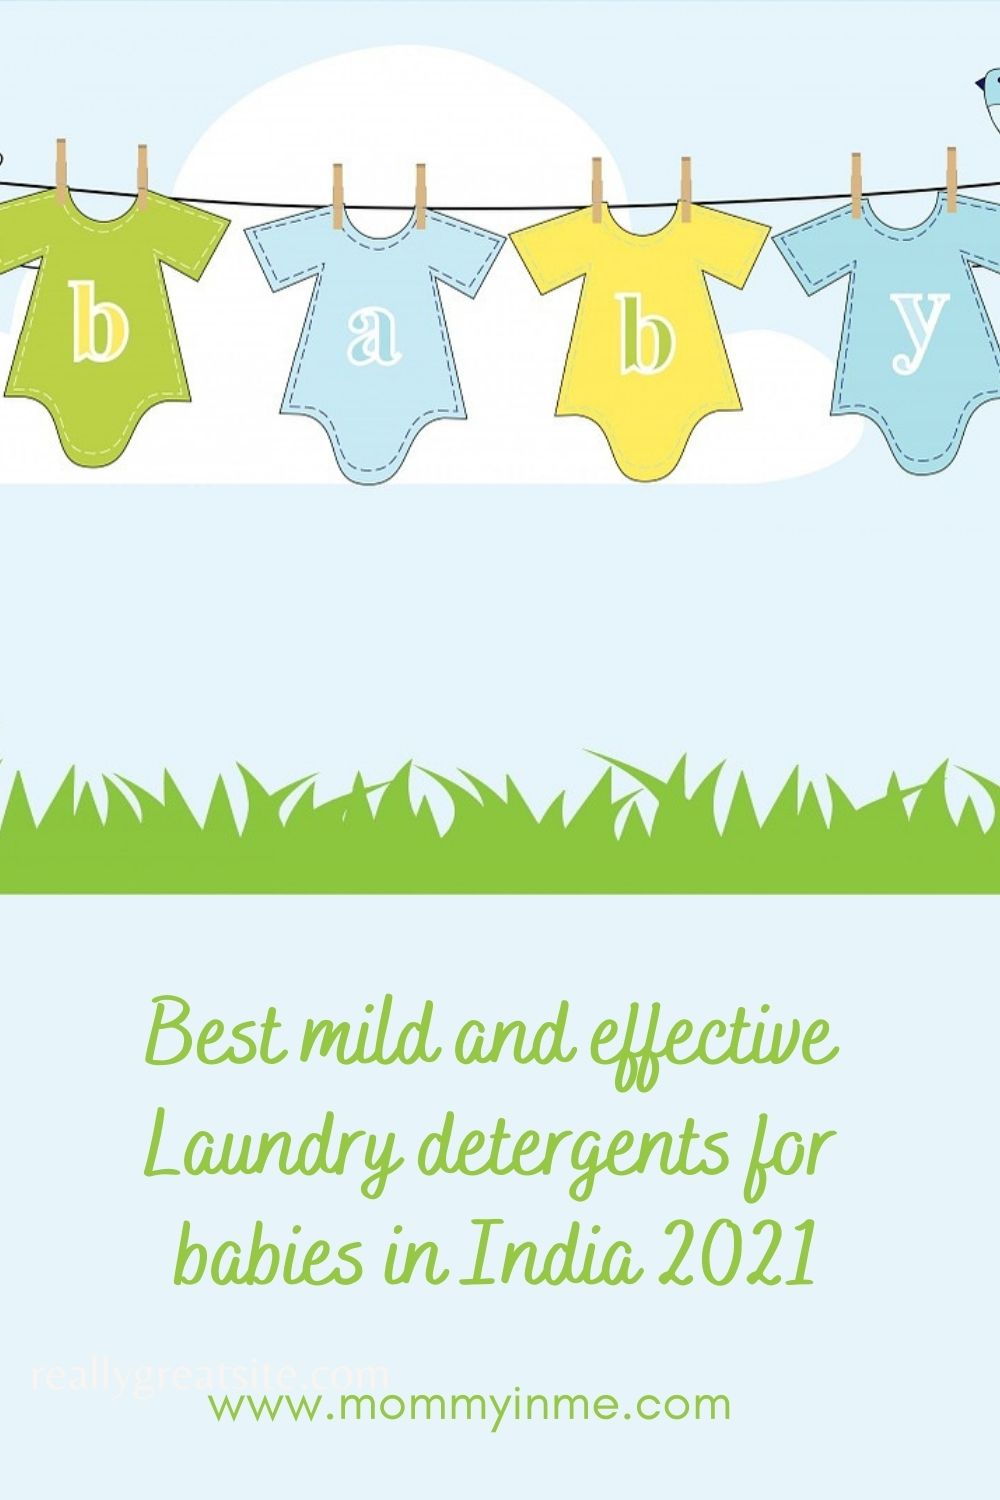 Looking for a mild yet effective Laundry detergent for babies? Something that is soft on baby's skin? Then here are some best laundry detergent's for babies in india #babydetergent #laundrydetergent #mildbabydetergent #Mothersparsh #luvlapbabydetergent #himalayababydetergent